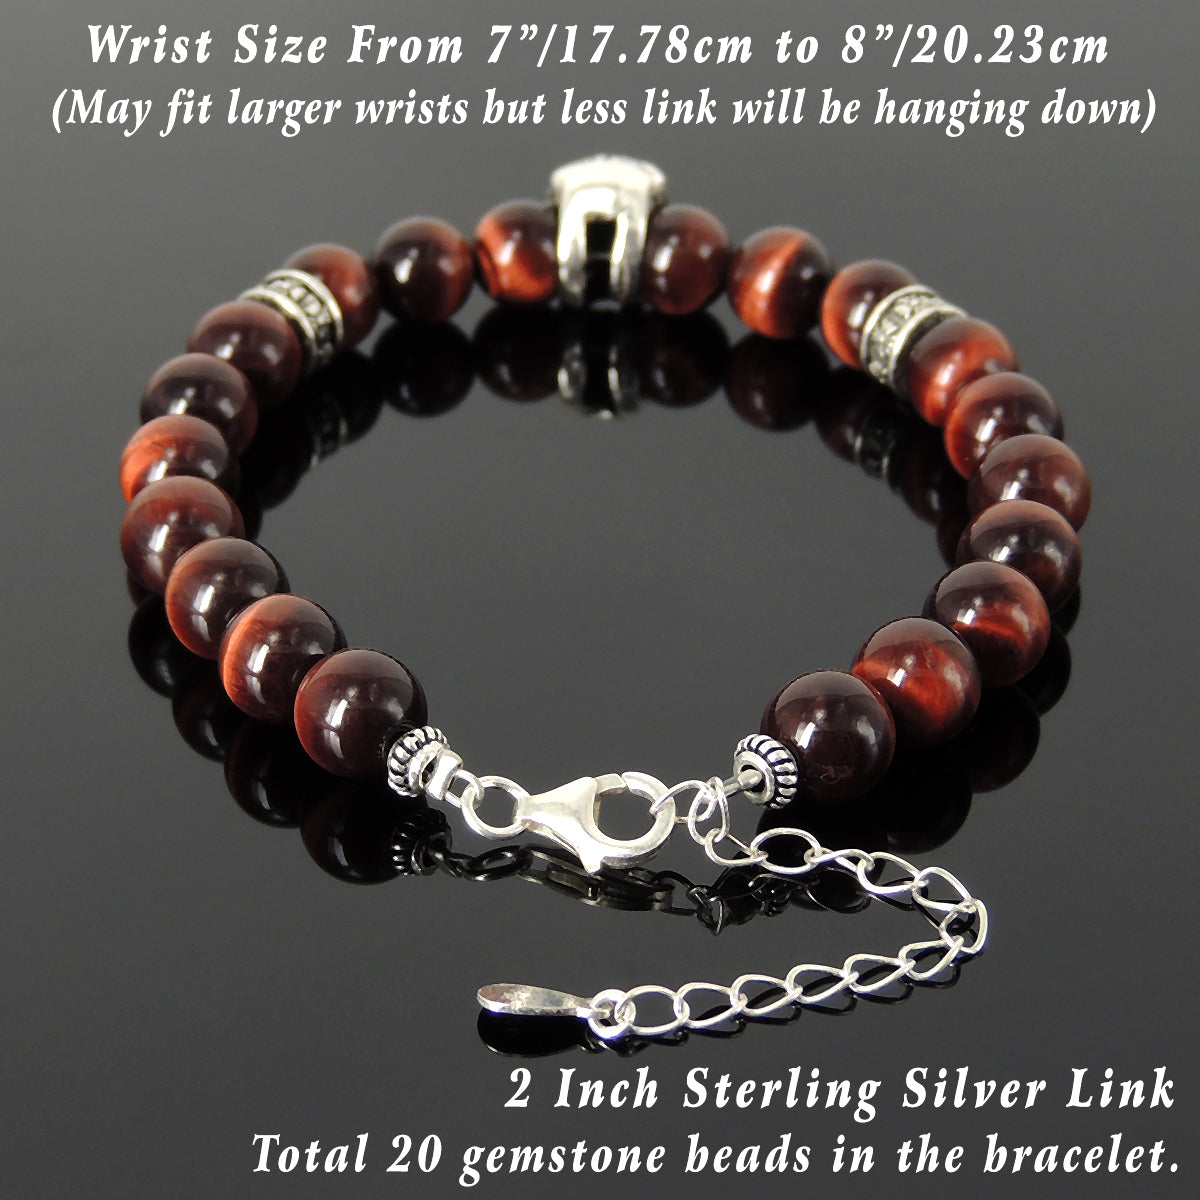 8mm Red Tiger Eye Healing Gemstone Bracelet with S925 Sterling Silver Protection Skull, Cross Pattern Spacers, Chain & Clasp - Handmade by Gem & Silver BR1412